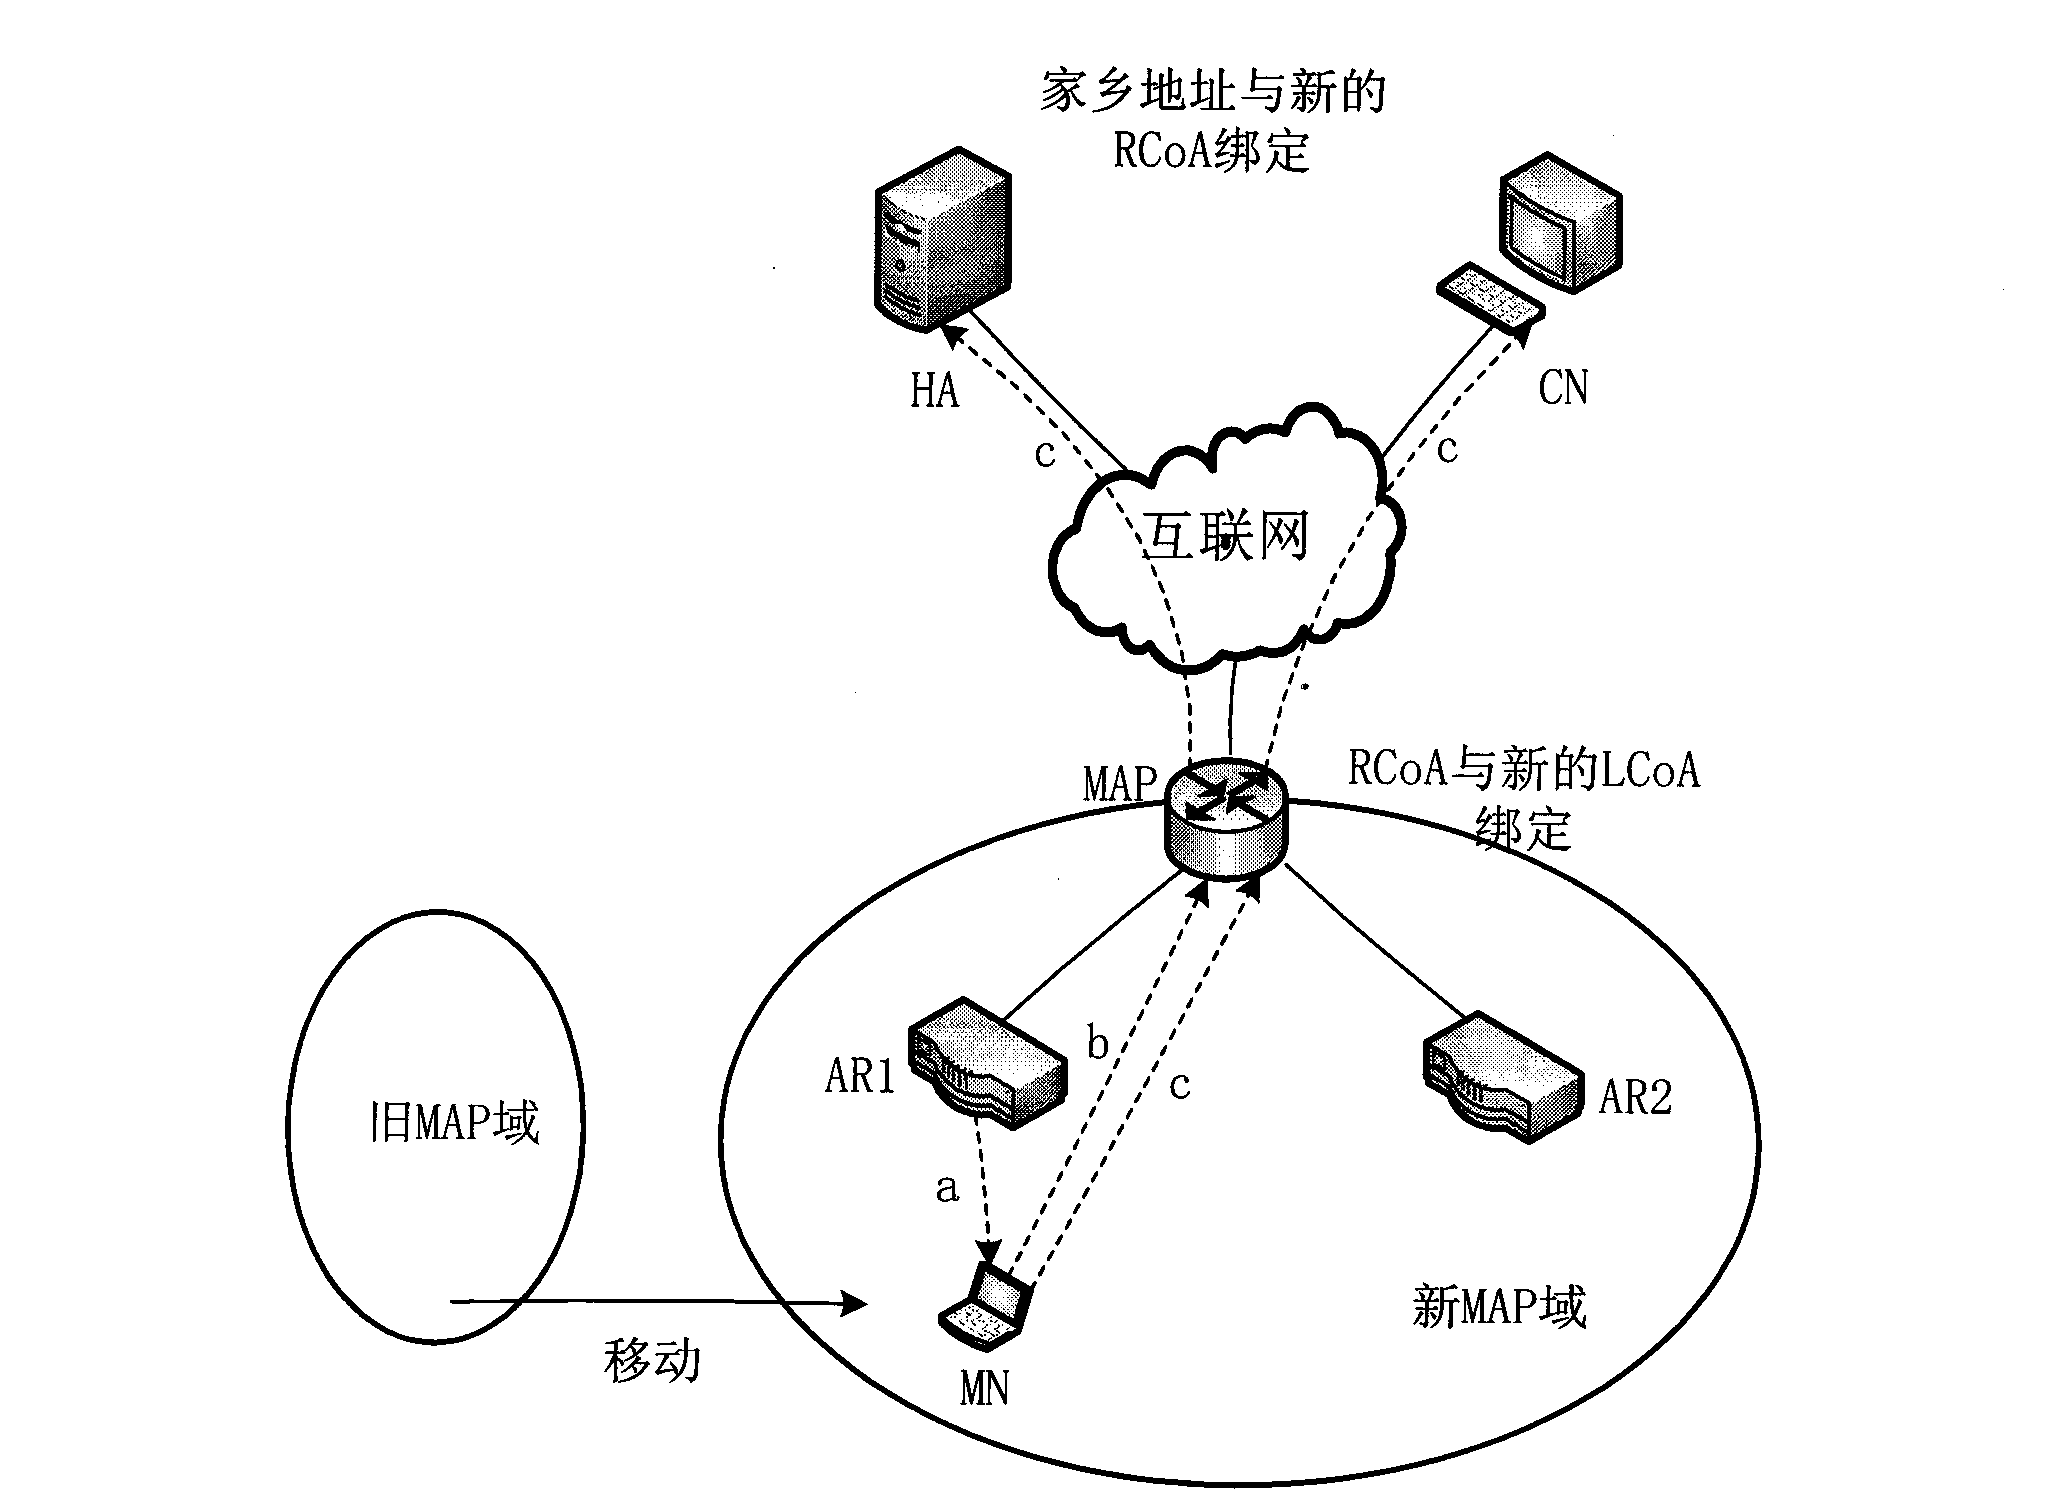 Method for hierarchical mobile IPv6 to avoid inter-domain handover